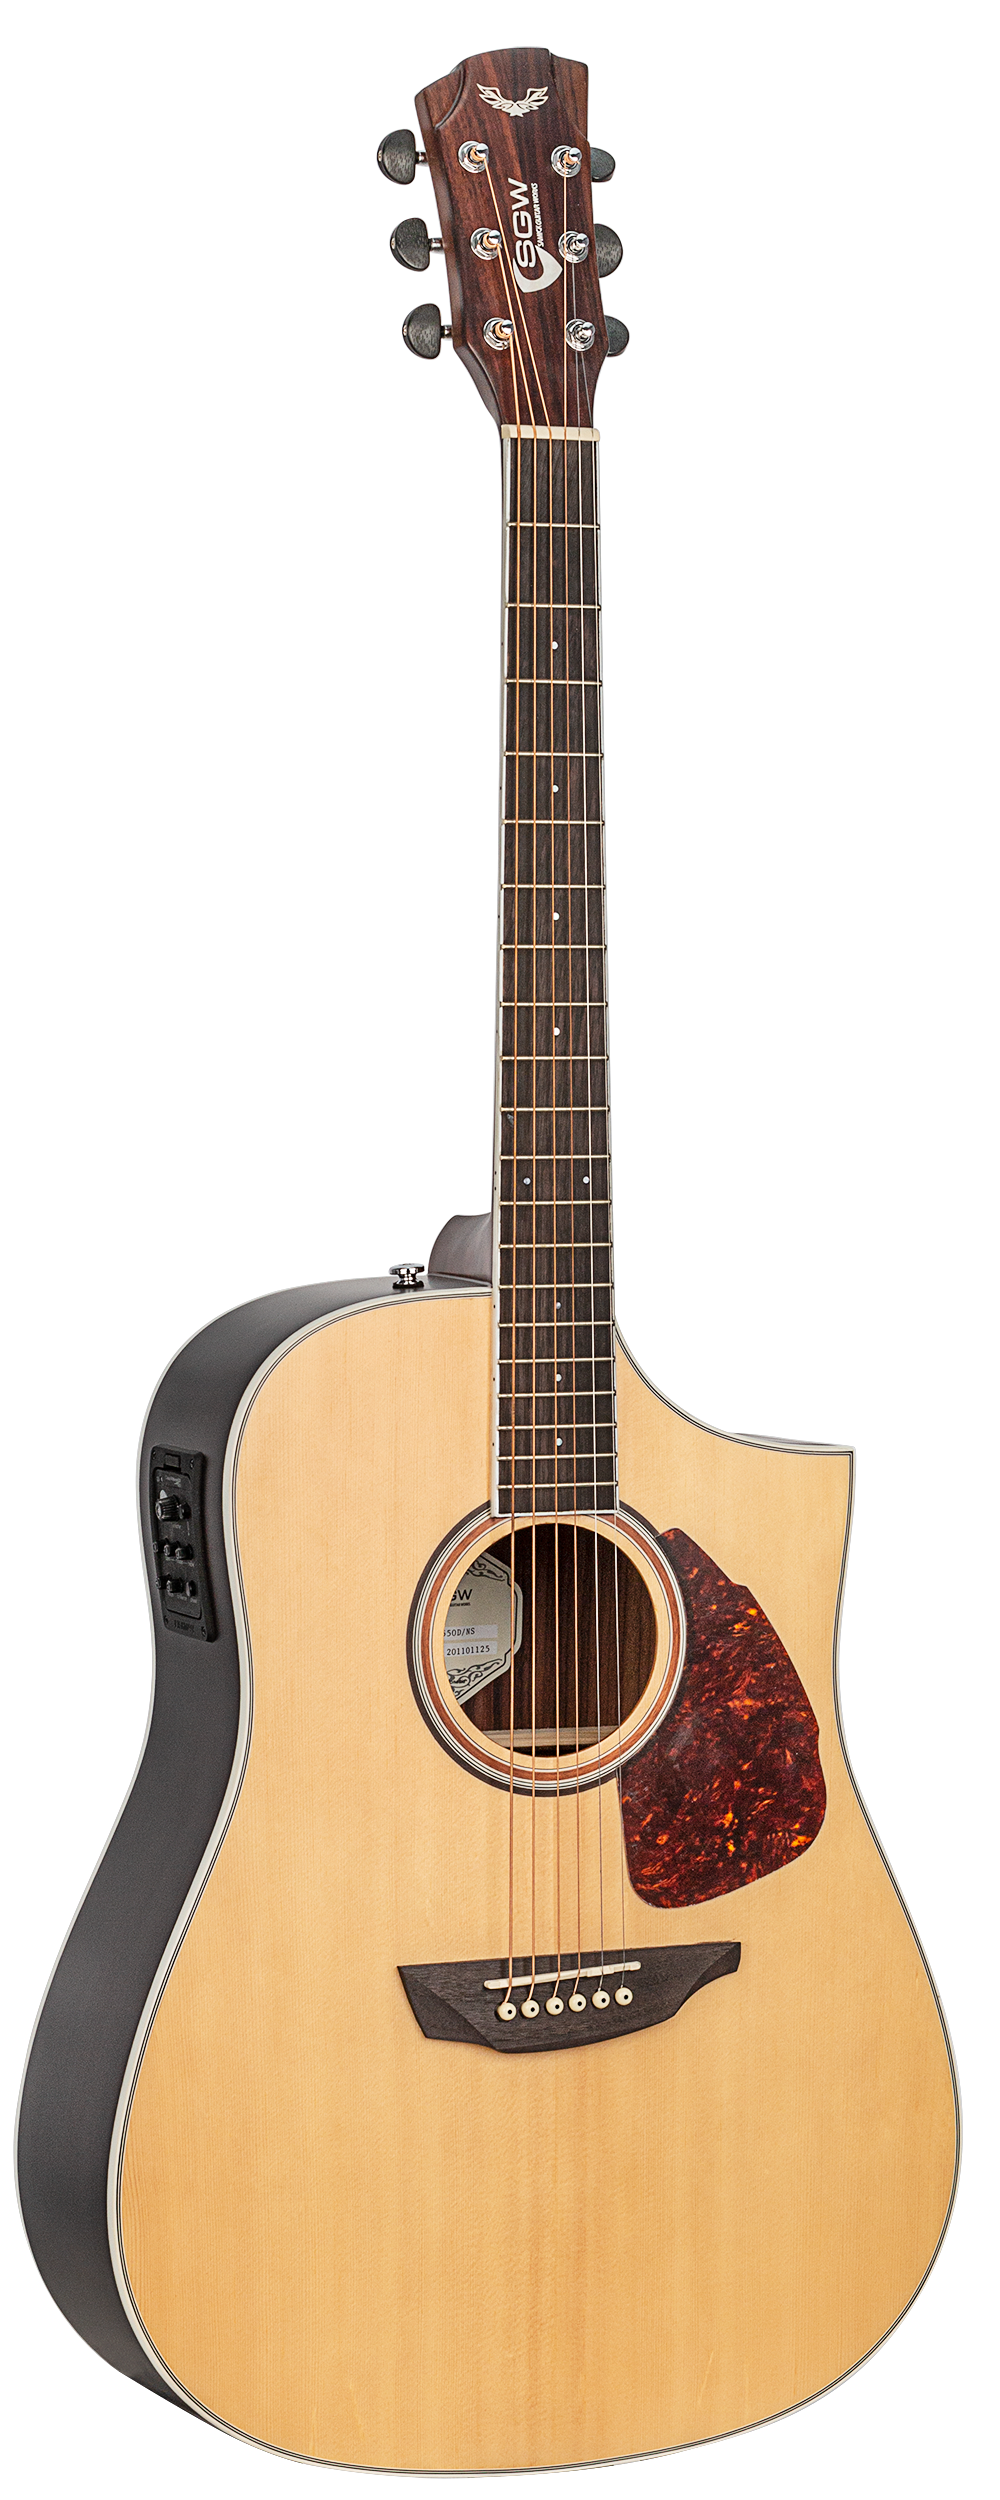 SGW S550DNS Dreadnought electric/acoustic guitar.